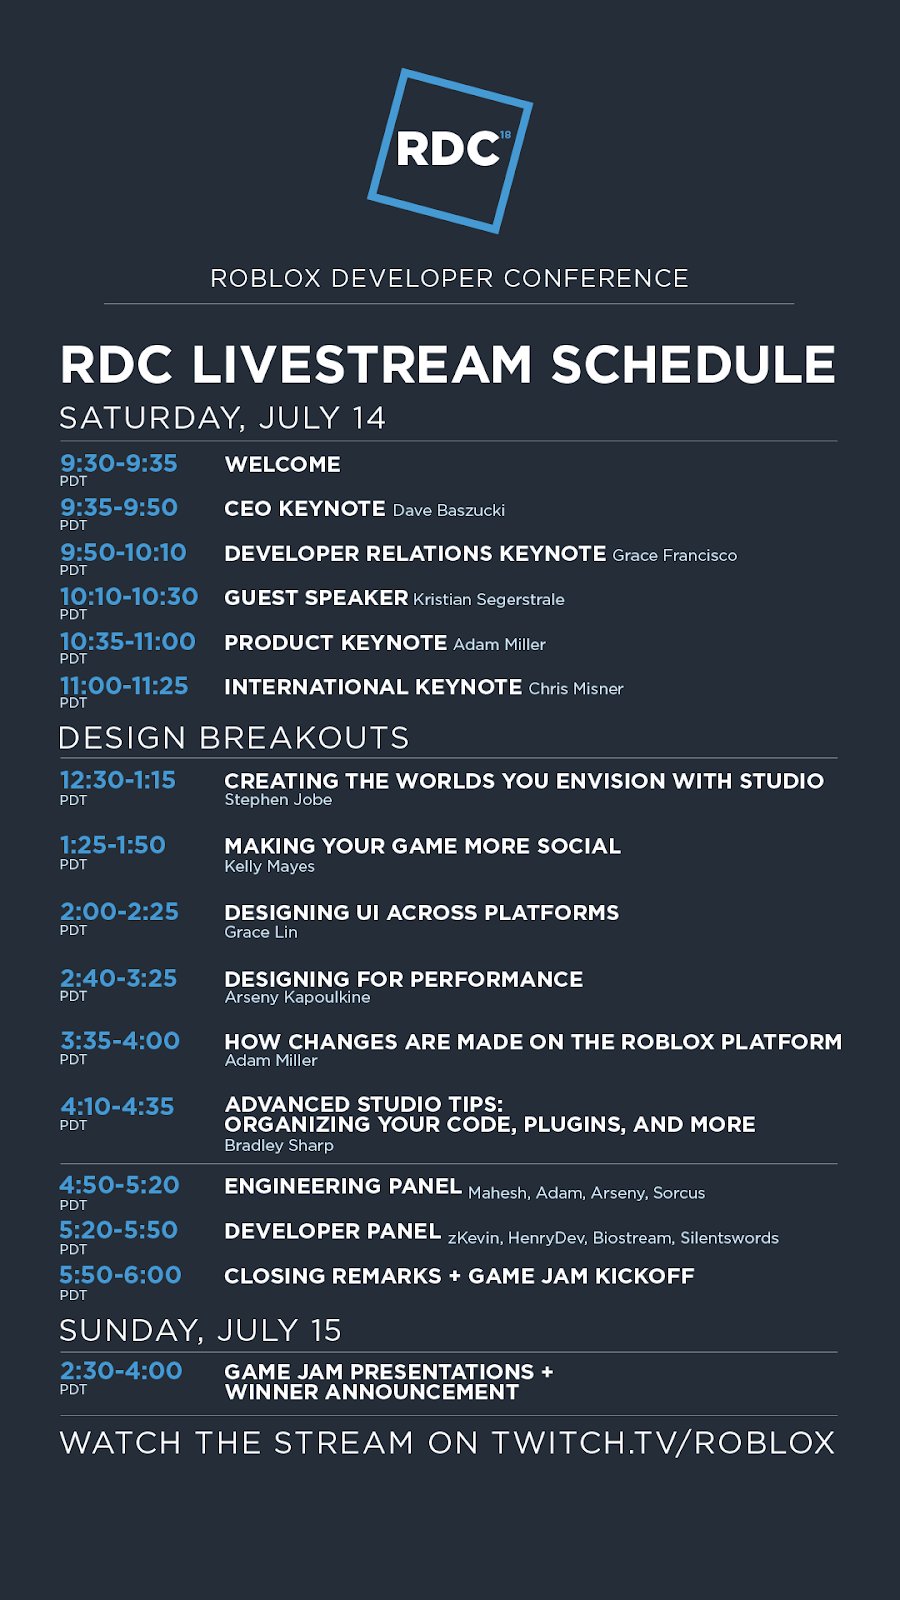 Free Robux On Twitter Enjoy Rdc2018 Live From Your Own Home Catch The Keynote From Our Beloved Builderman Davidbaszucki Then Learn New Tricks And Secrets From Our Roblox Experts And Star Developers - free robux on twitter enjoy rdc2018 live from your own